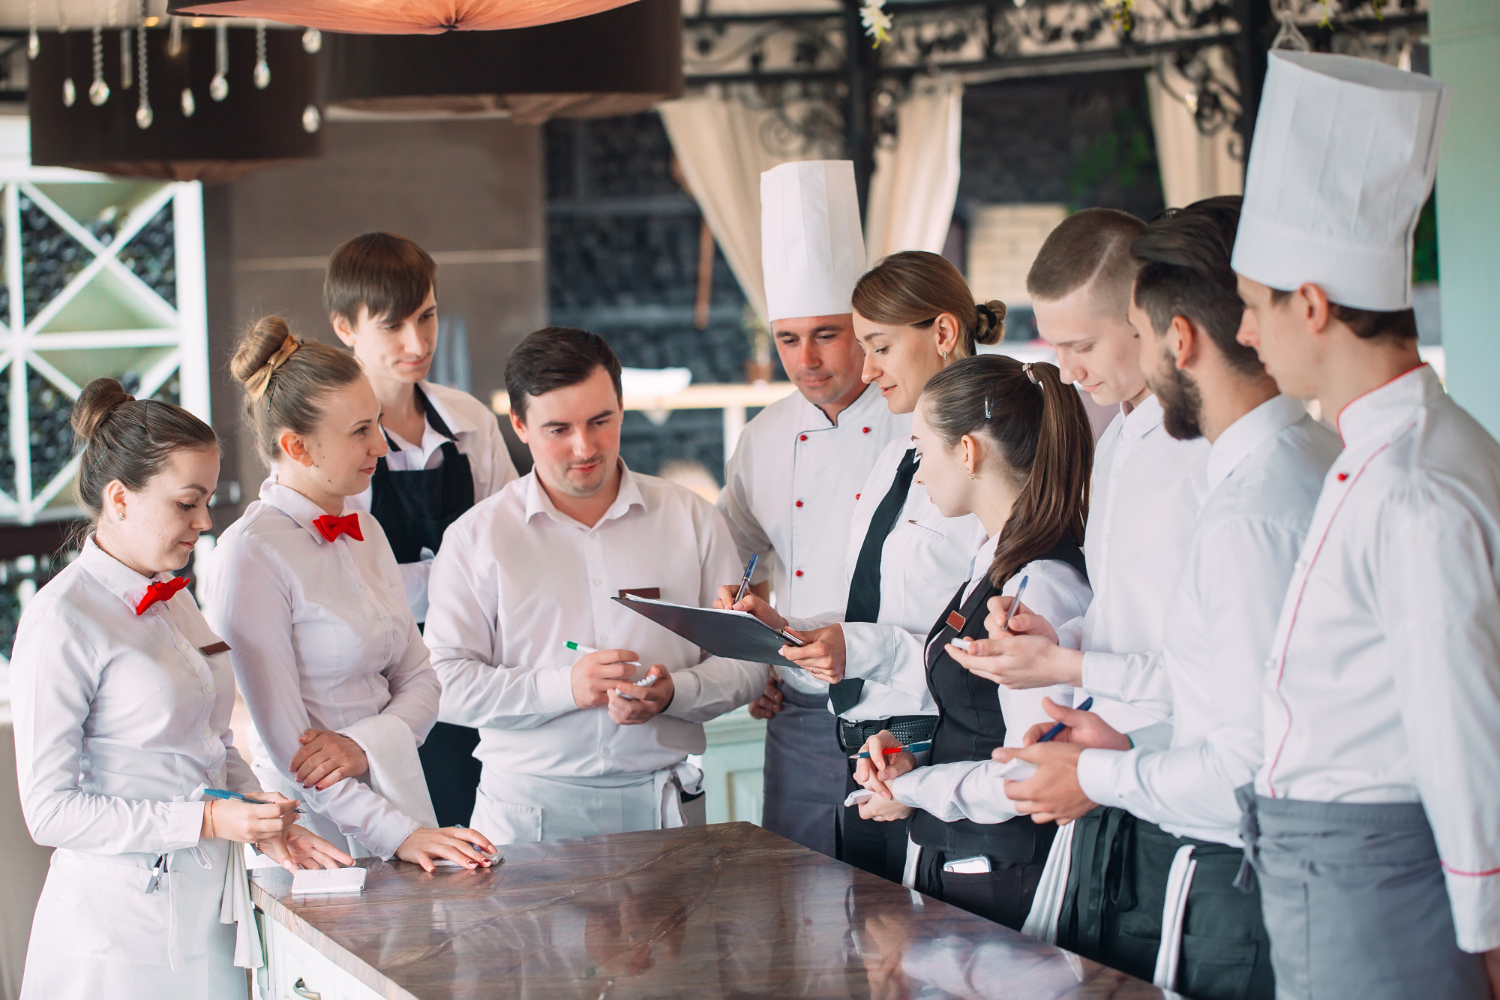 A femal restaurant manager holding a clipboard is surrounded by her restaurant employees, holding a team meeting. The employees are dressed in black and white, some wearing chef coats and hats, others wearing white aprons.